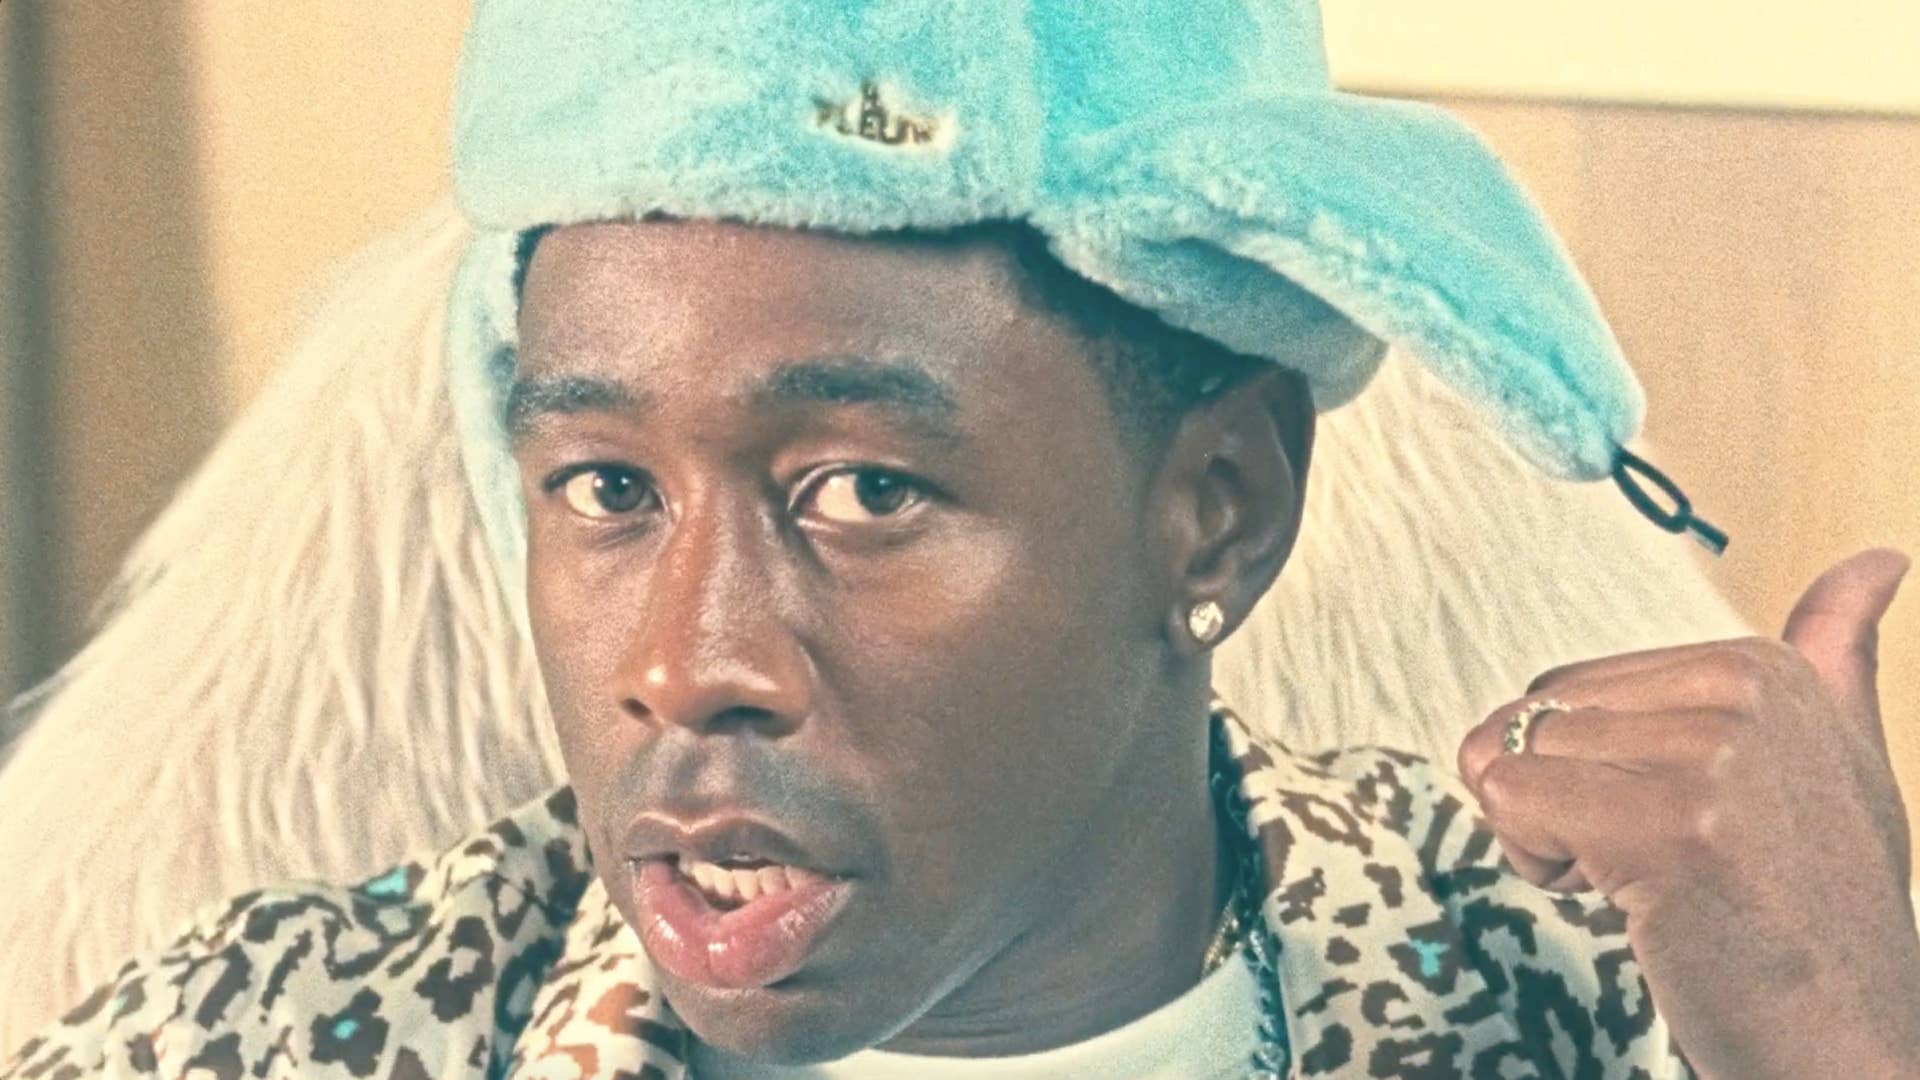 200+] Tyler The Creator Backgrounds